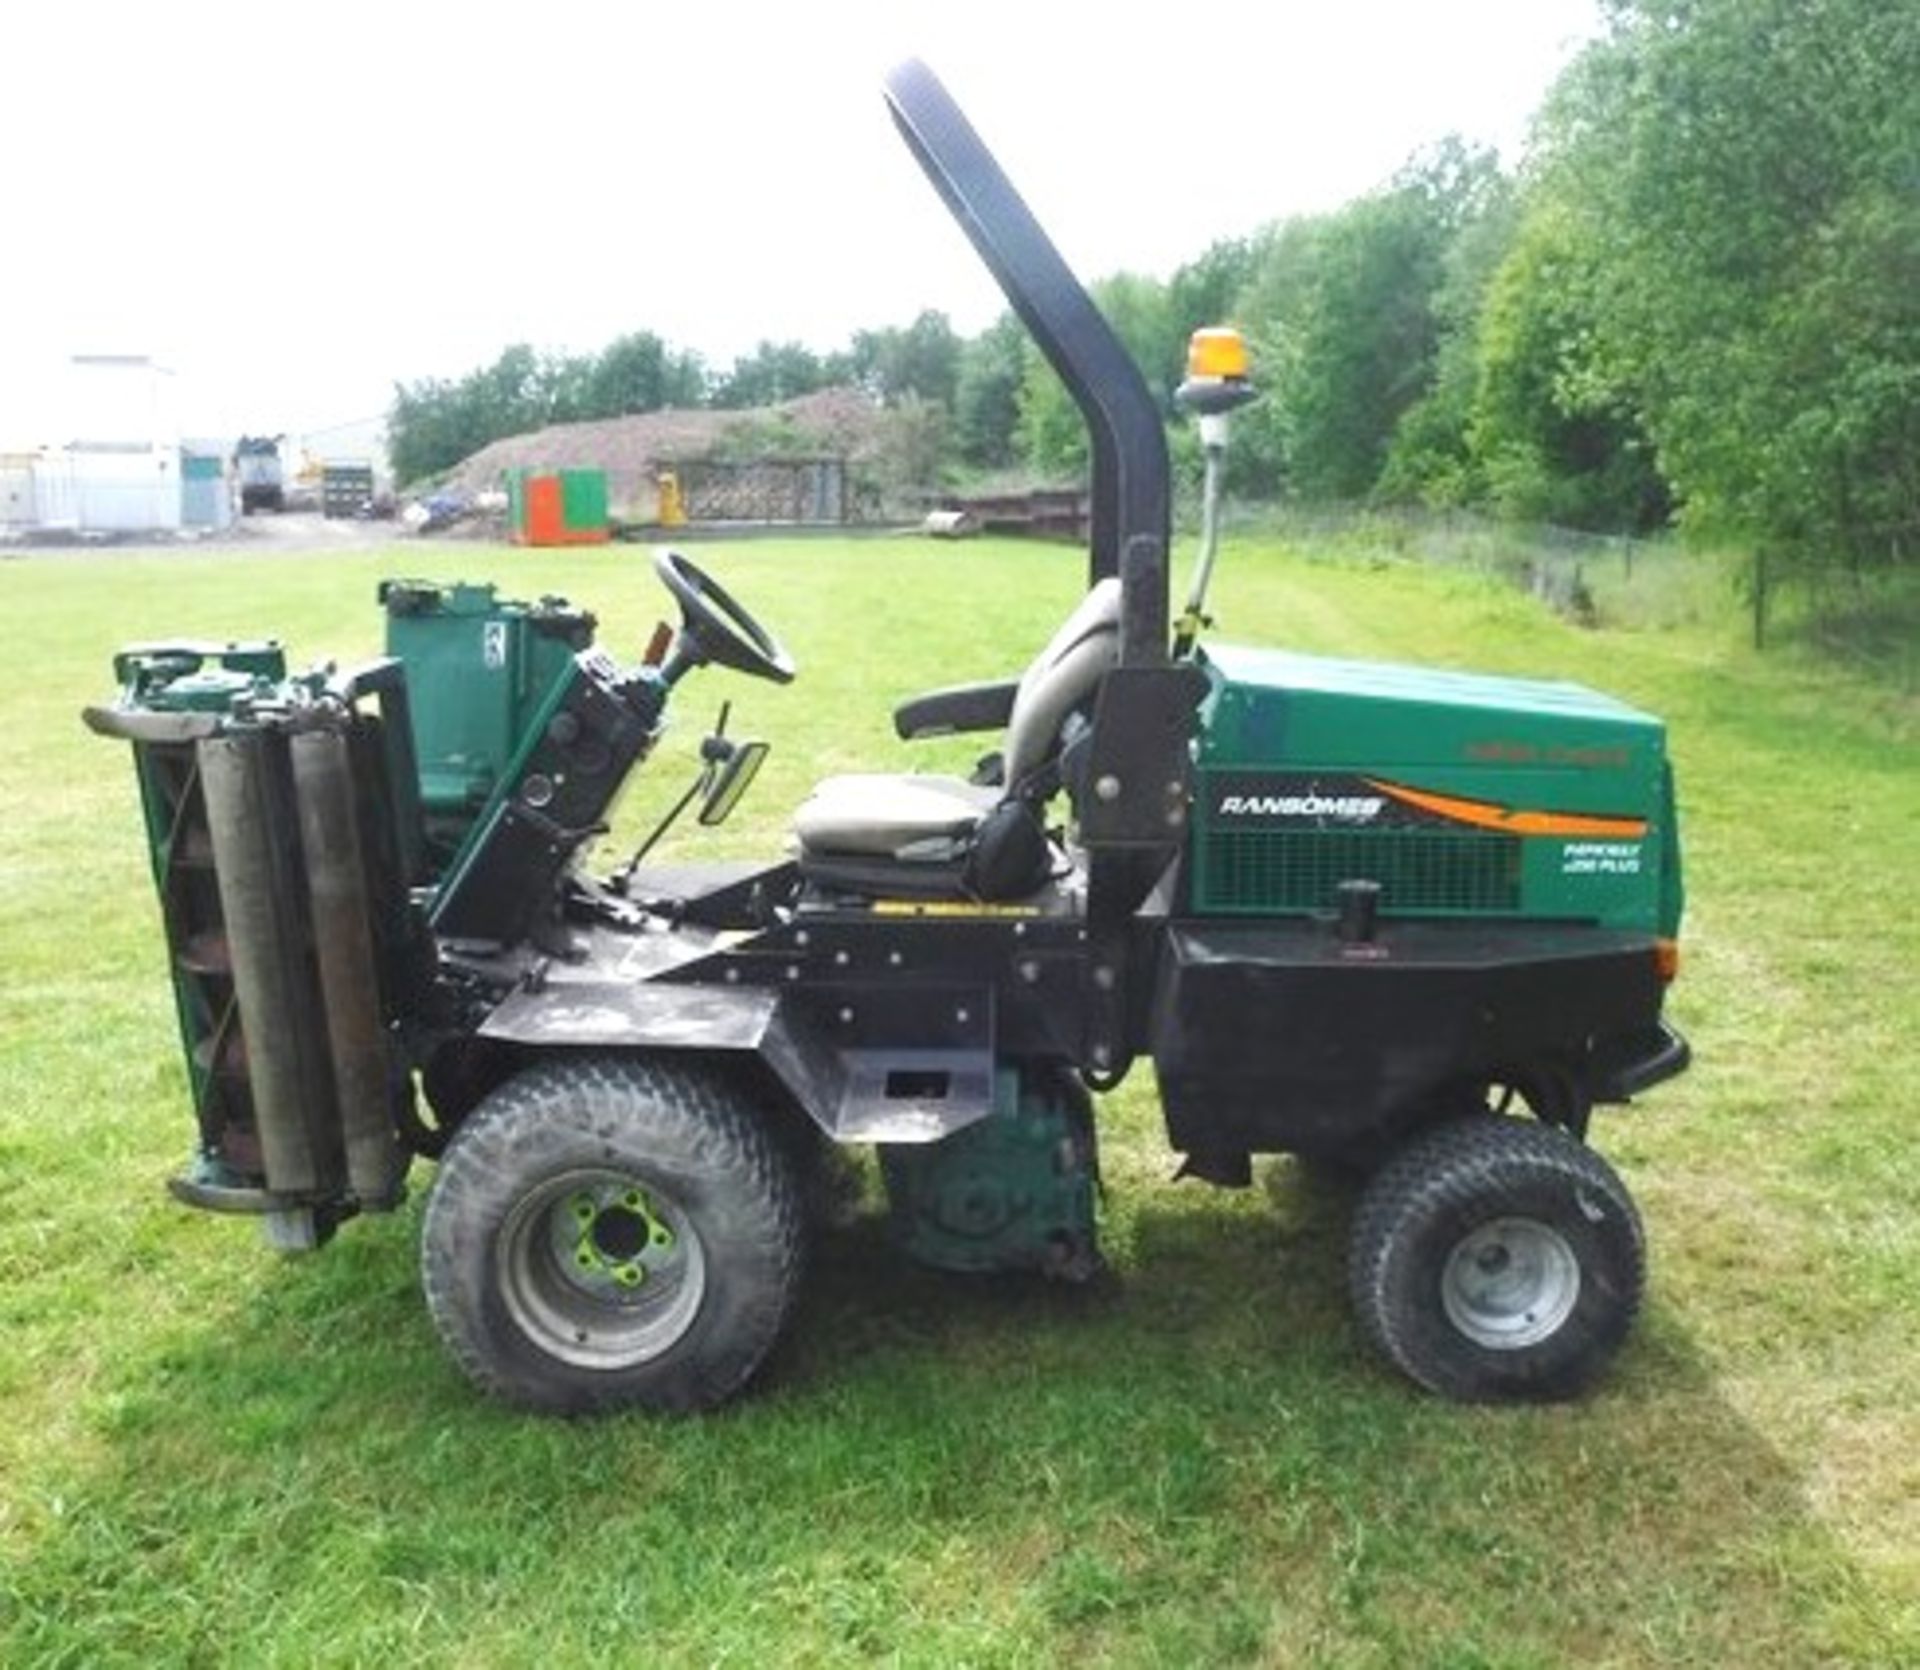 2009 RANSOME PARKWAY 2250 PLUS MOWER. REG NO SF58 OUA. 2714 HRS - Image 18 of 19